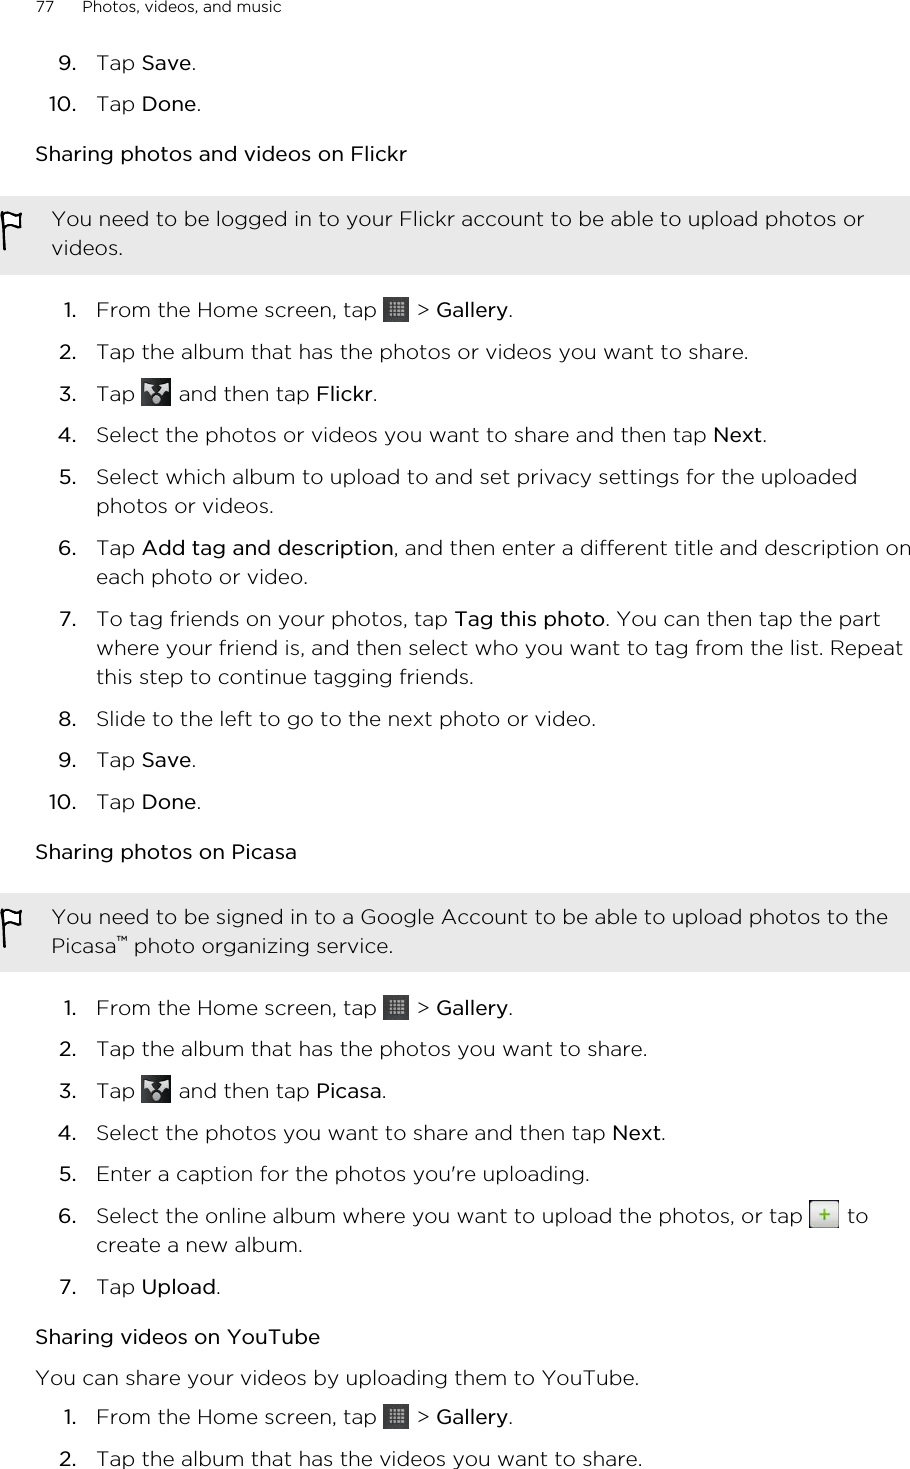 9. Tap Save.10. Tap Done.Sharing photos and videos on FlickrYou need to be logged in to your Flickr account to be able to upload photos orvideos.1. From the Home screen, tap   &gt; Gallery.2. Tap the album that has the photos or videos you want to share.3. Tap   and then tap Flickr.4. Select the photos or videos you want to share and then tap Next.5. Select which album to upload to and set privacy settings for the uploadedphotos or videos.6. Tap Add tag and description, and then enter a different title and description oneach photo or video.7. To tag friends on your photos, tap Tag this photo. You can then tap the partwhere your friend is, and then select who you want to tag from the list. Repeatthis step to continue tagging friends.8. Slide to the left to go to the next photo or video.9. Tap Save.10. Tap Done.Sharing photos on PicasaYou need to be signed in to a Google Account to be able to upload photos to thePicasa™ photo organizing service.1. From the Home screen, tap   &gt; Gallery.2. Tap the album that has the photos you want to share.3. Tap   and then tap Picasa.4. Select the photos you want to share and then tap Next.5. Enter a caption for the photos you&apos;re uploading.6. Select the online album where you want to upload the photos, or tap   tocreate a new album.7. Tap Upload.Sharing videos on YouTubeYou can share your videos by uploading them to YouTube.1. From the Home screen, tap   &gt; Gallery.2. Tap the album that has the videos you want to share.77 Photos, videos, and music